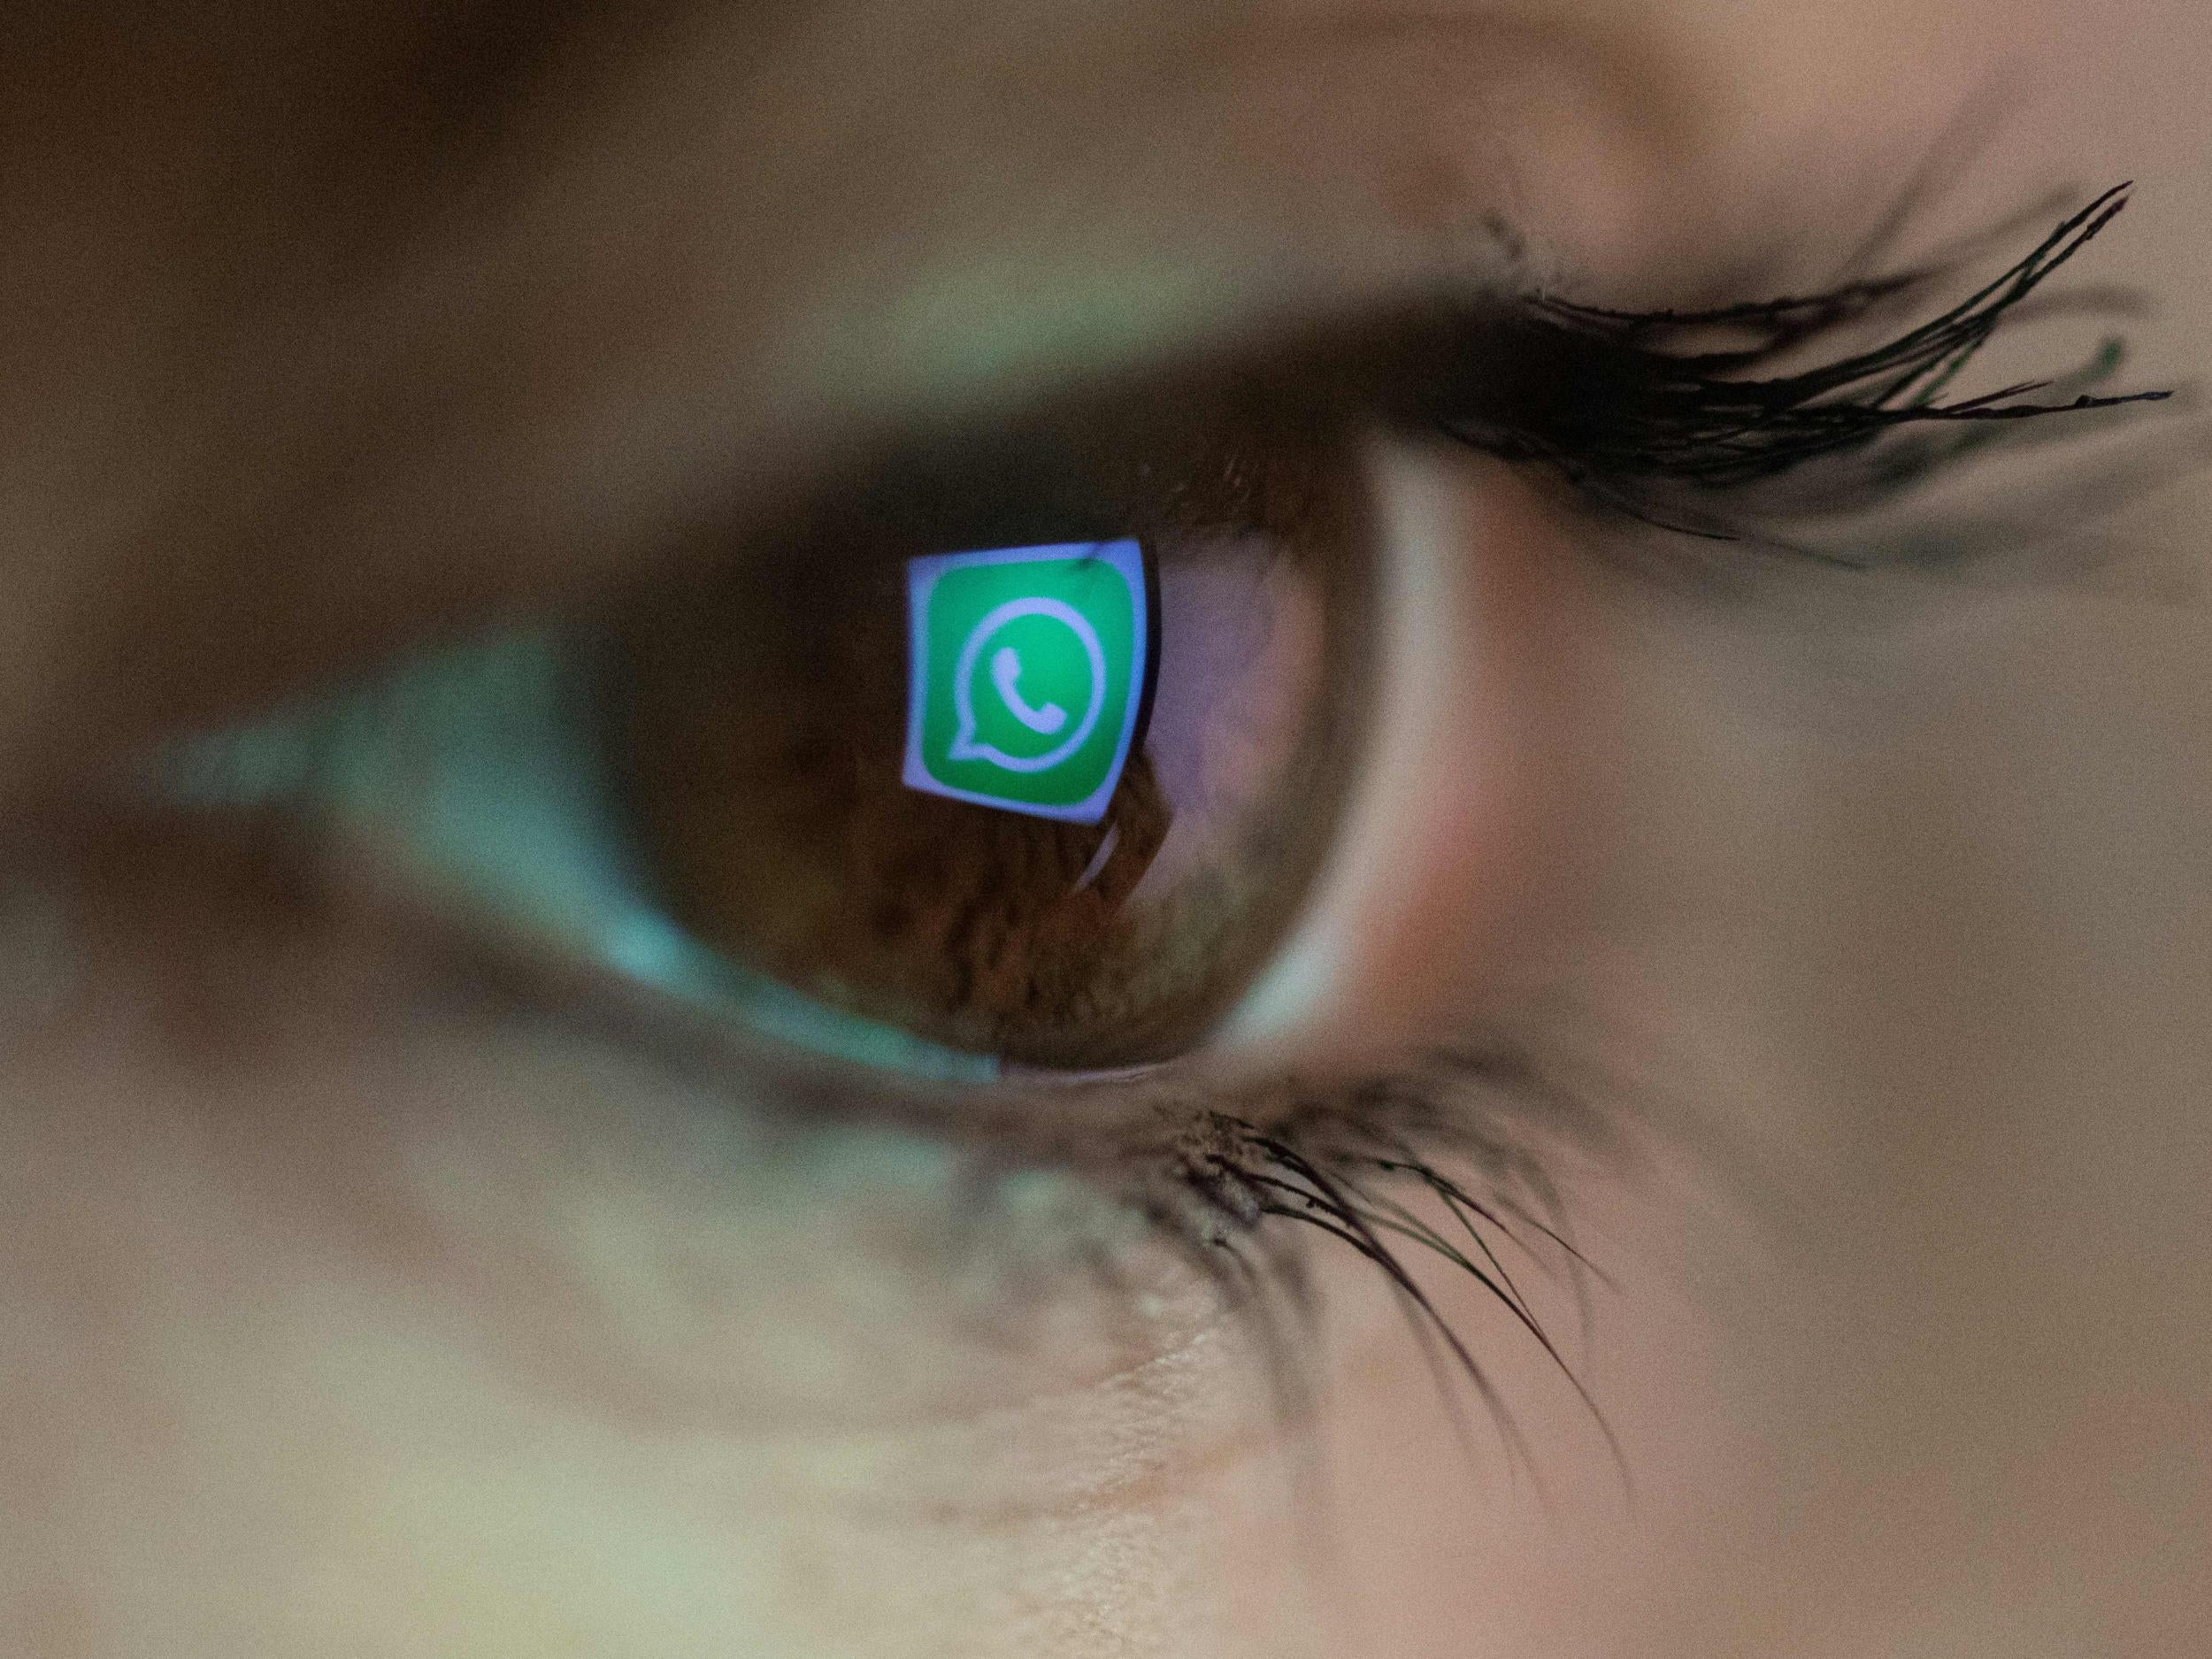 WhatsApp users are allegedly sharing child porn images and video in India